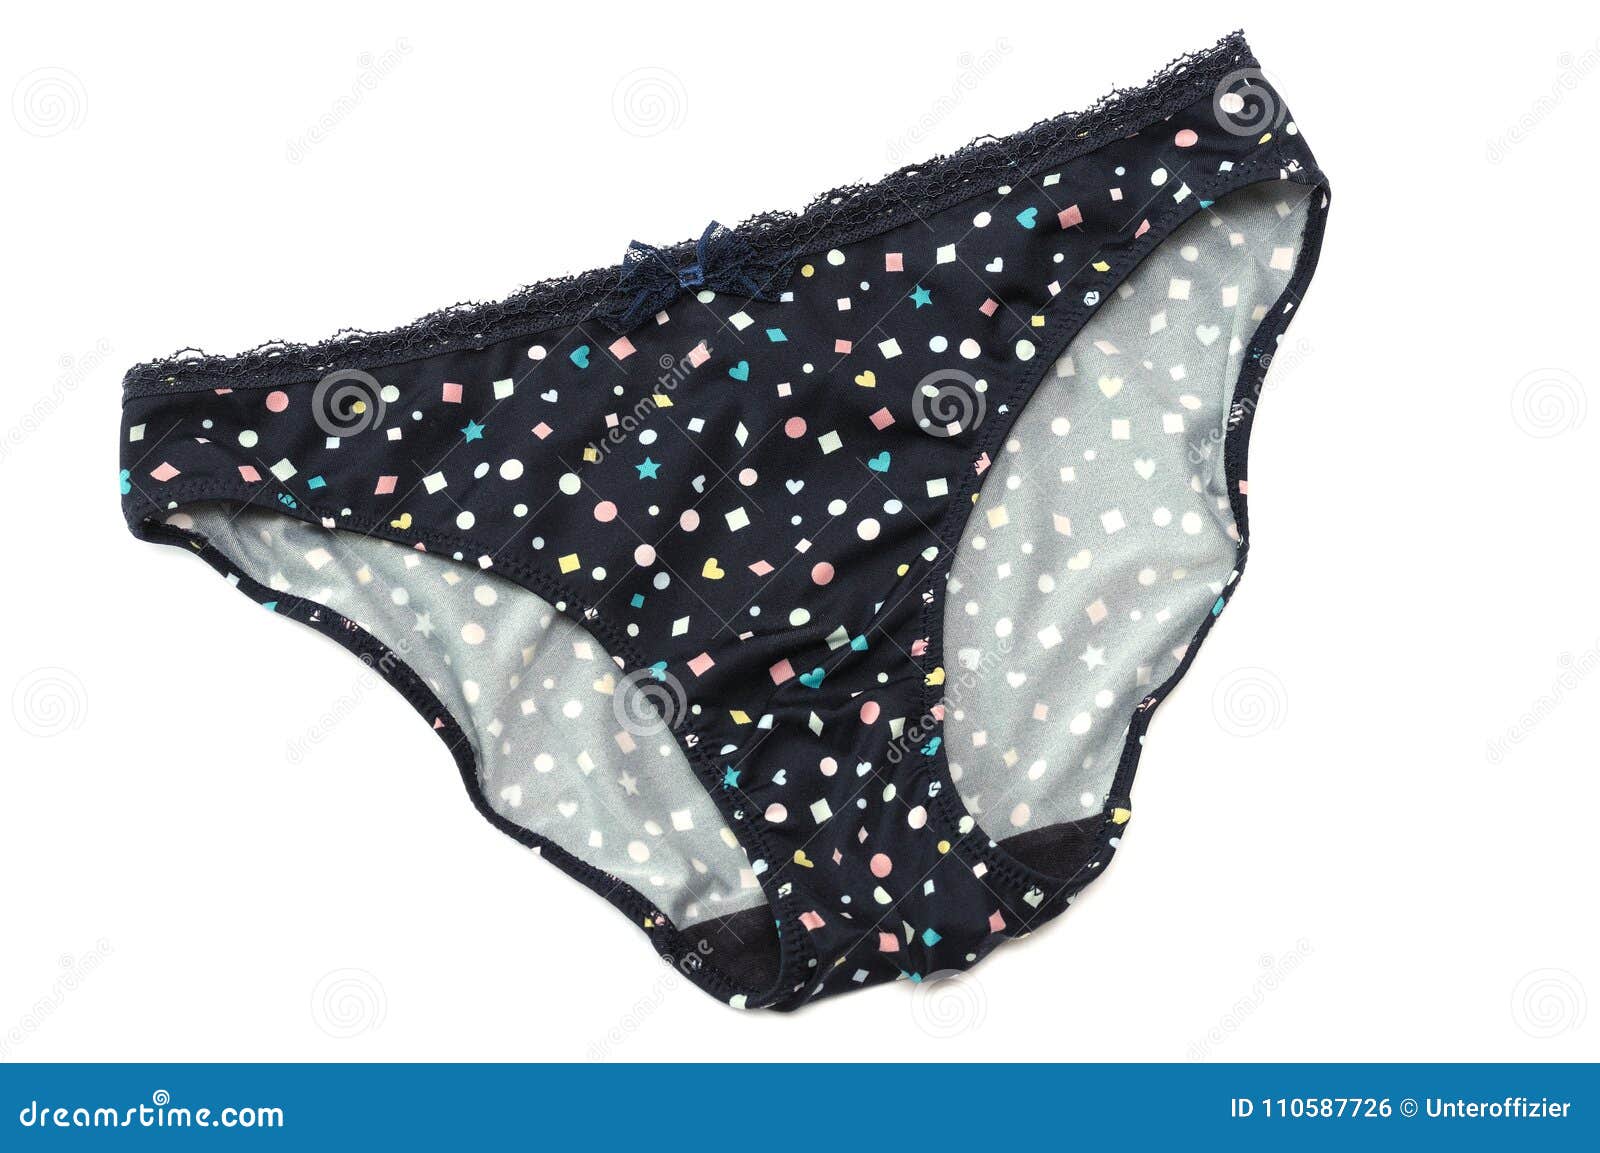 A Dark Blue Colored Pantie for Women Stock Photo - Image of attract ...